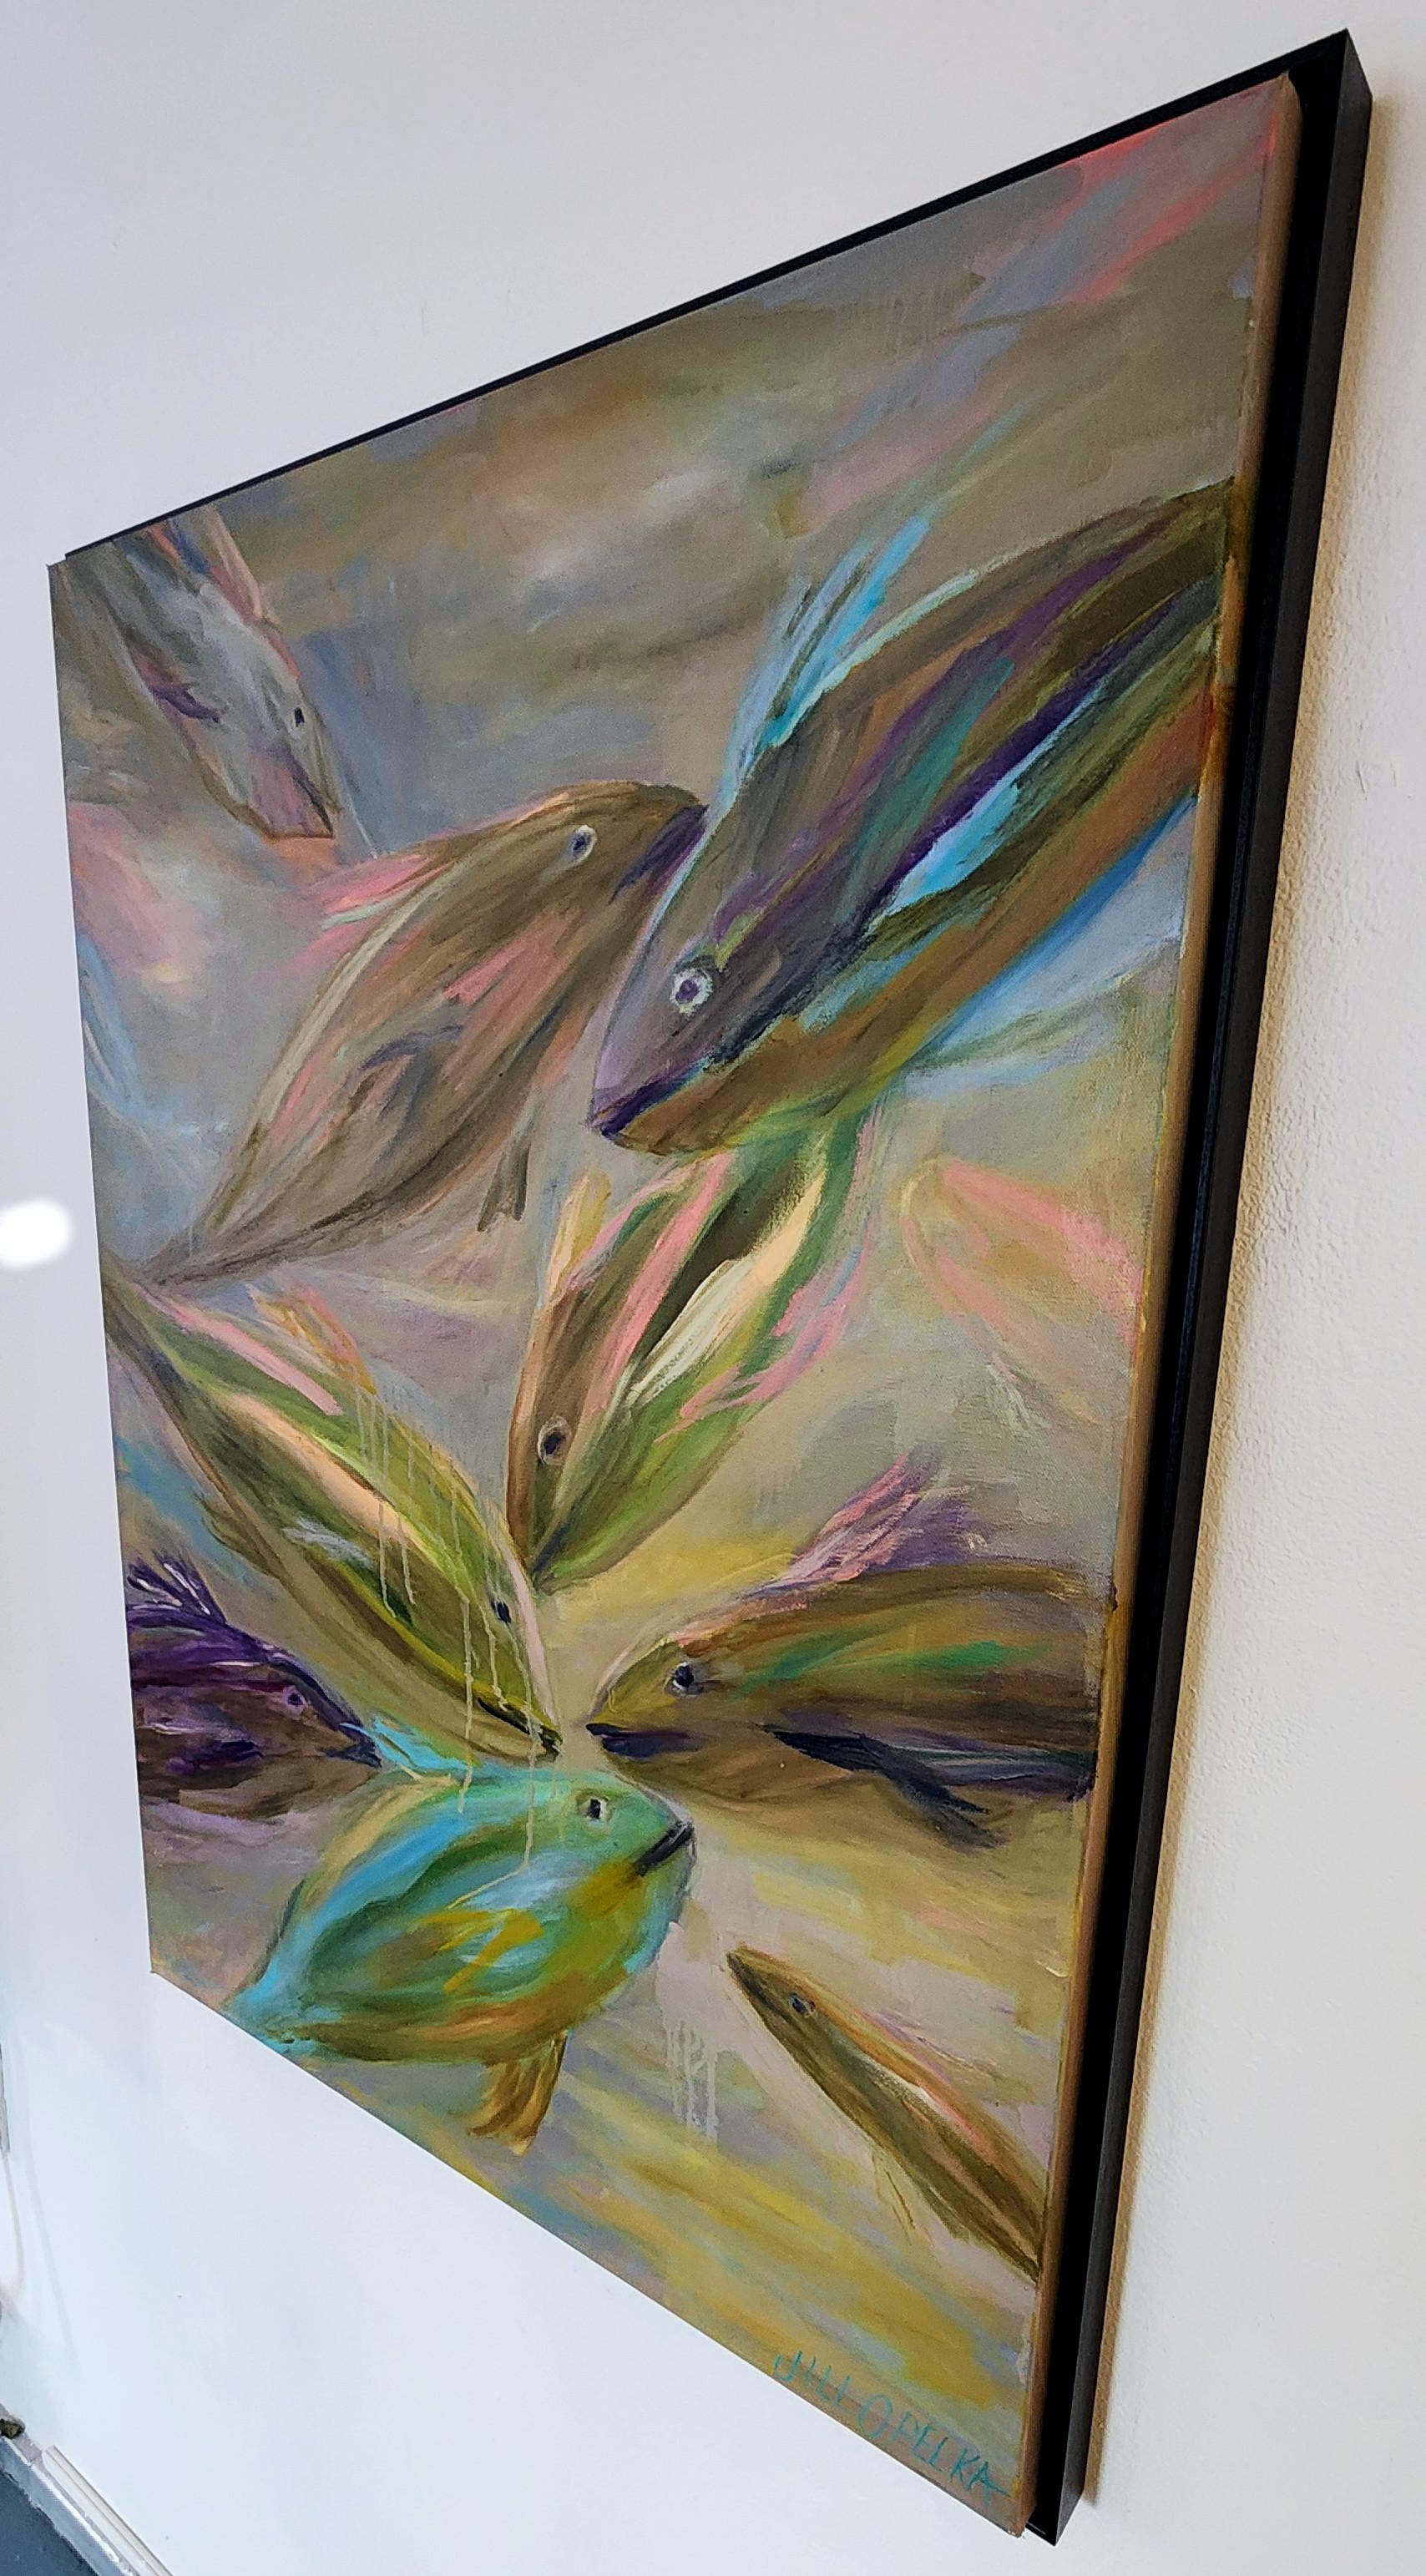 Jill Opelka
Mackarel
Oil on Canvas
Year: 2023
Size: 40x30in
Framed: 41x31x1.5in
Signed by hand
COA provided
Ref.: 924802-2051

Tags: Fish, School, Saba, Green, Light Green, Blue, Pink, Soft, Warm

*Framed in a black wooden